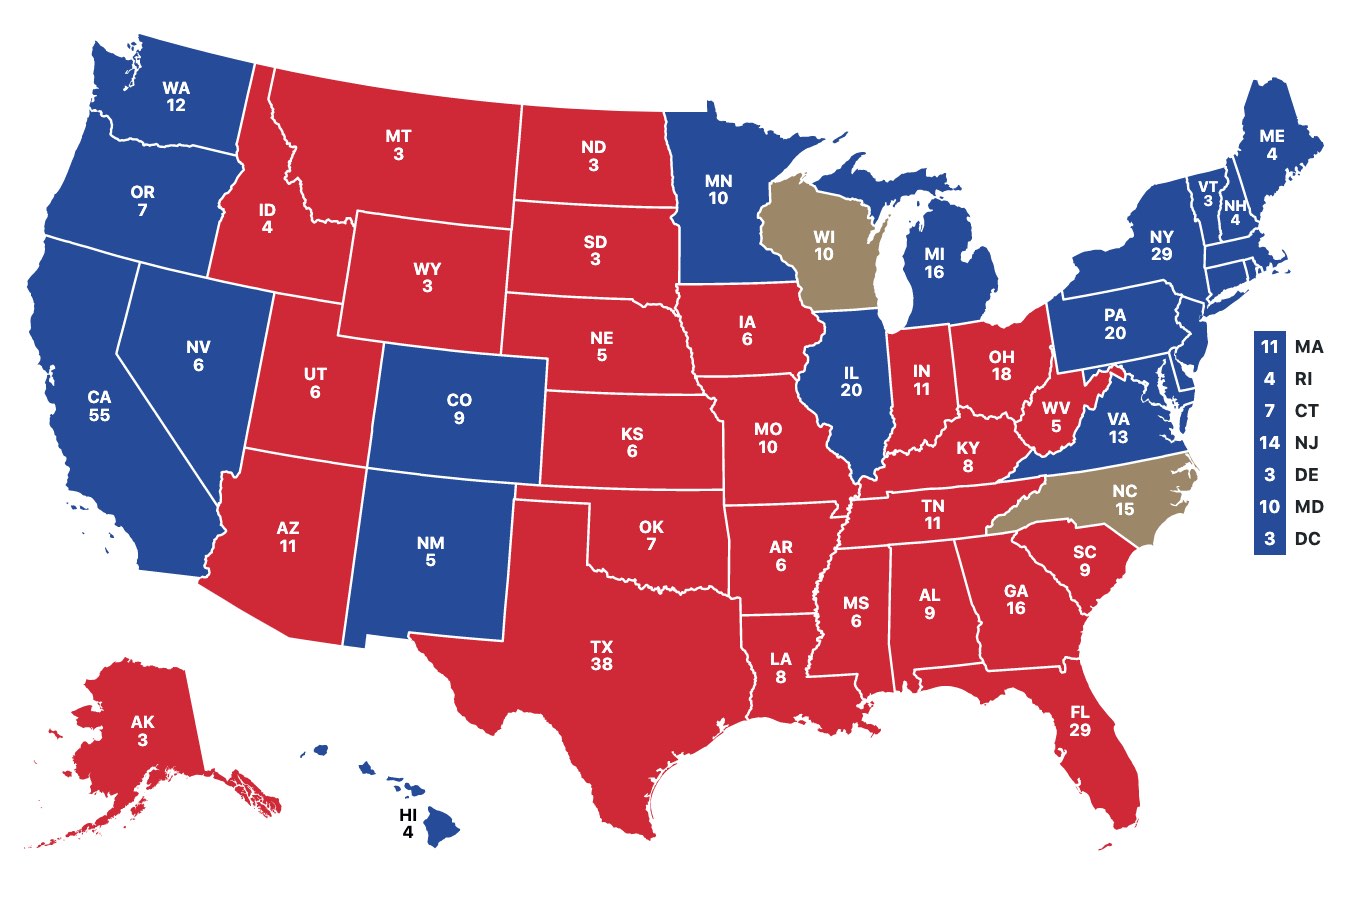 The west coast, New England,
the coastal mid-Atlantic, Colorado/New Mexico, and the upper midwest except for Wisconsin are blue. Wisconsin and North Carolina are
brown. The rest of the country is red.